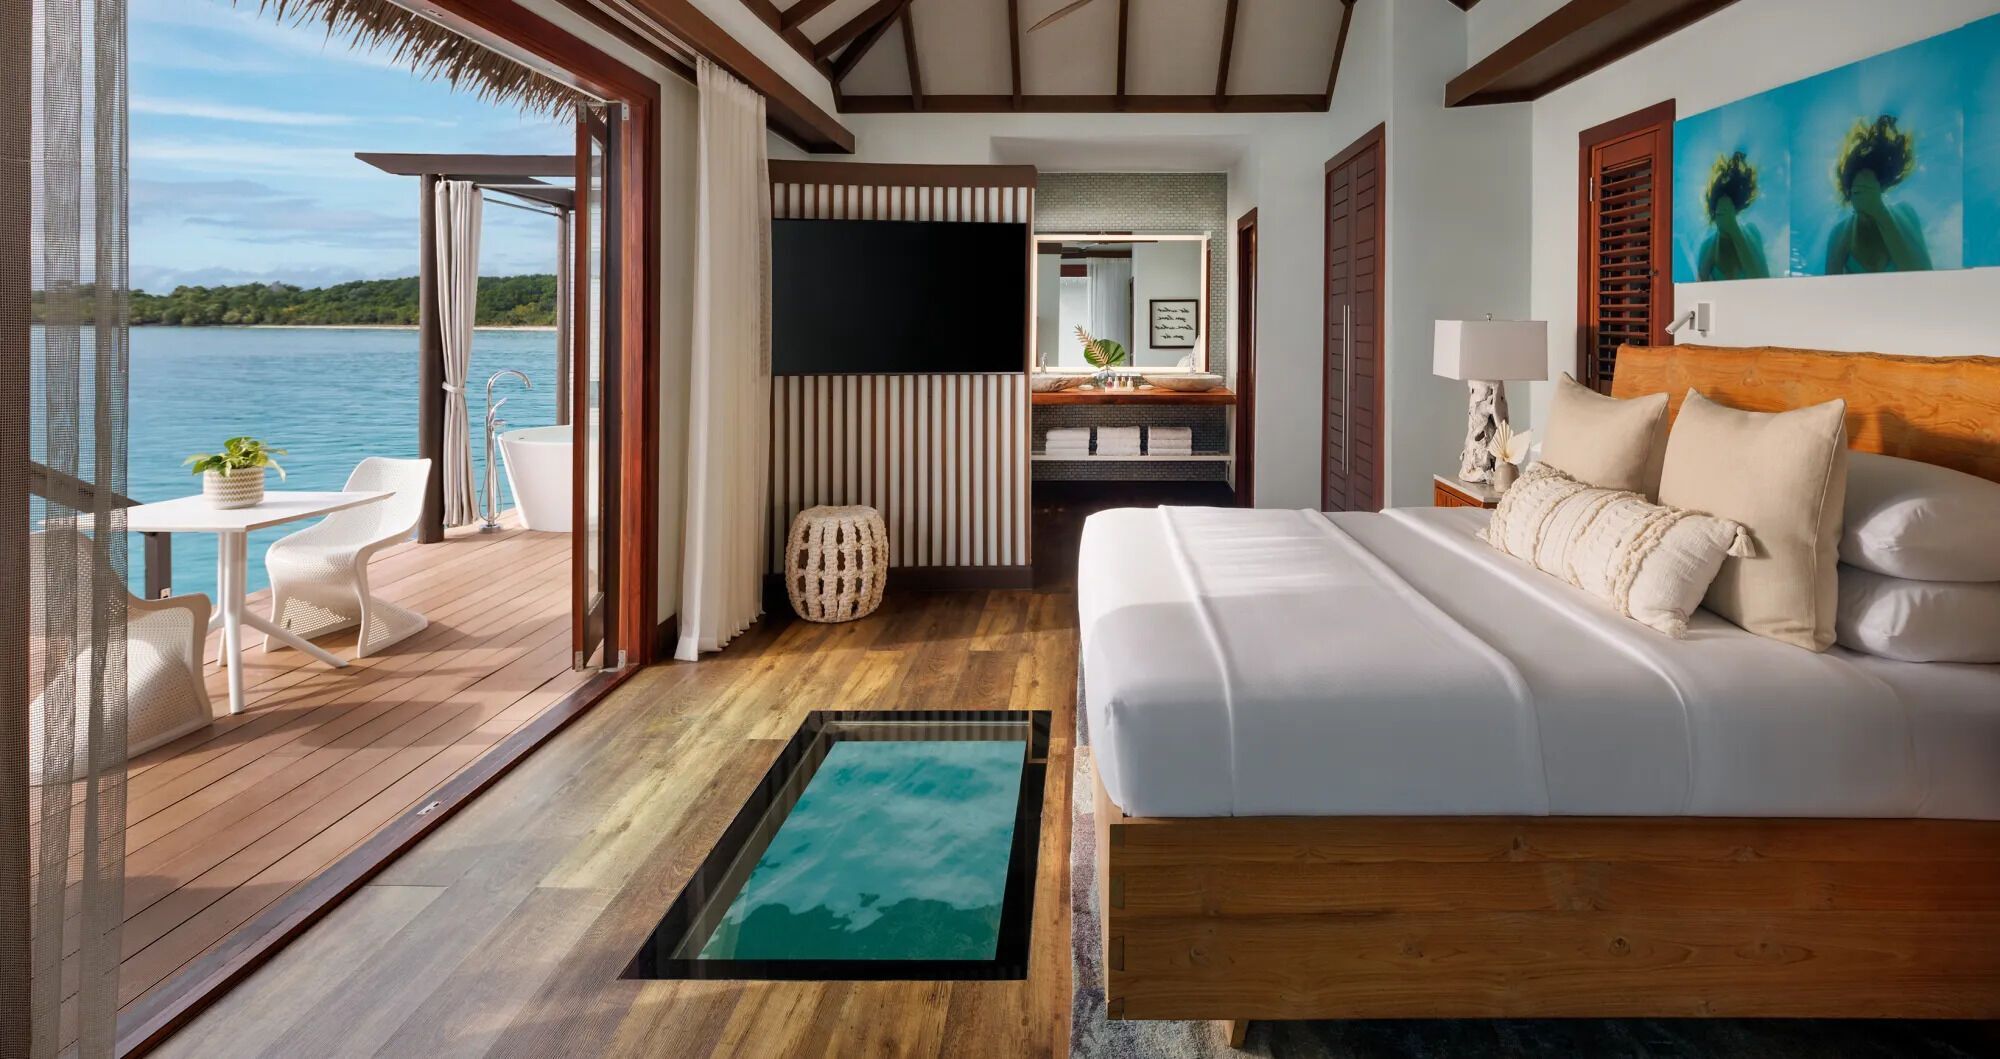 Overwater bungalows at Jamaica's Sandals South Coast: a dream resort for romantic getaways and special moments